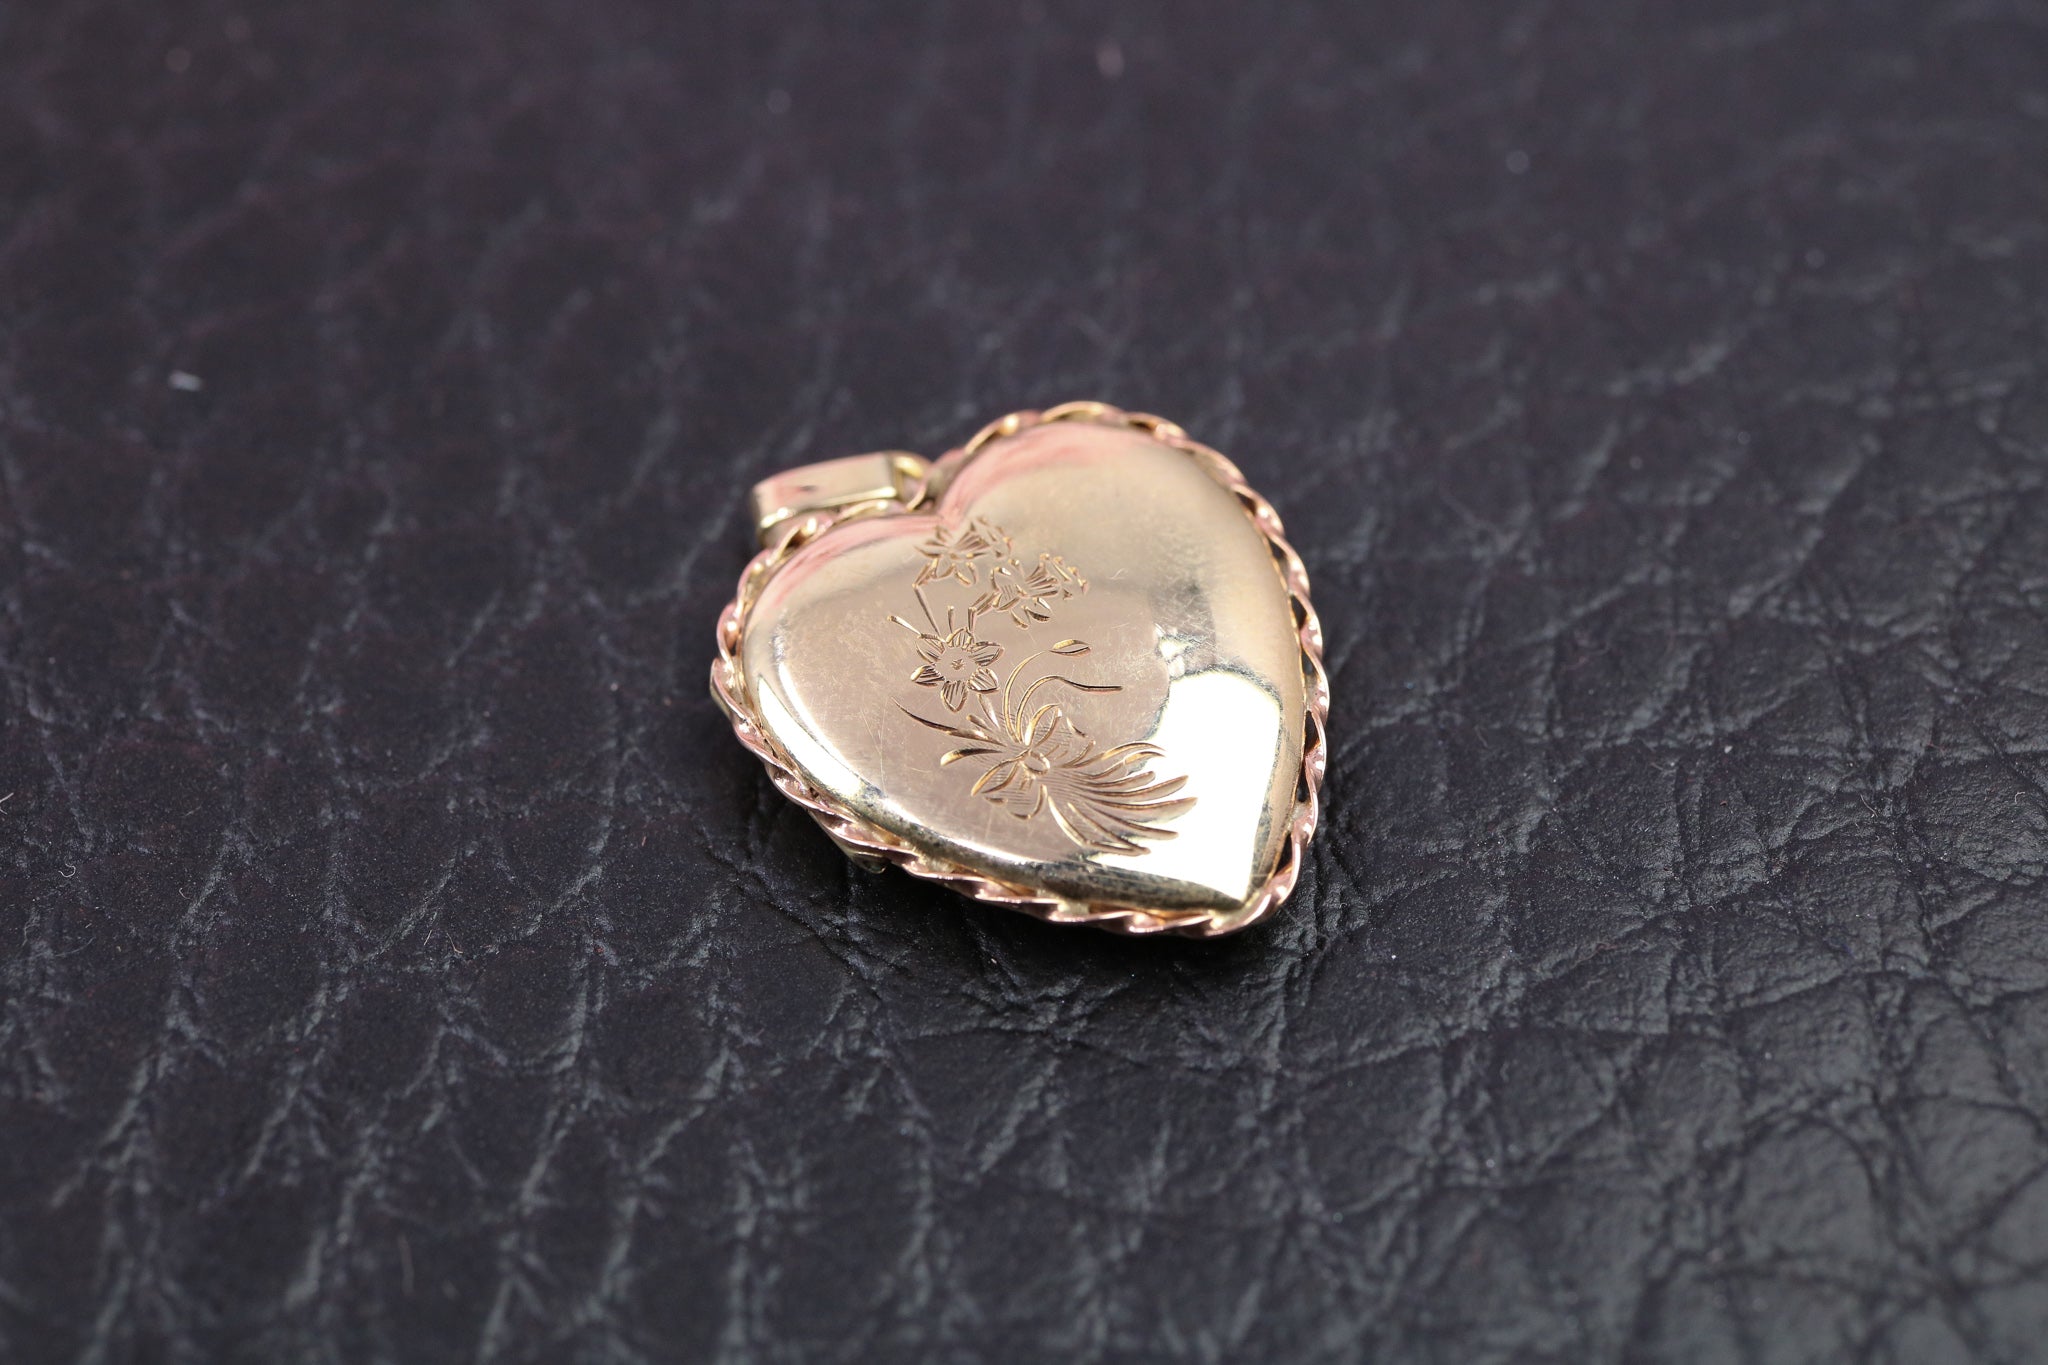 9ct Yellow Gold Locket Pendant - HJ2323 - Hallmark Jewellers Formby & The Jewellers Bench Widnes